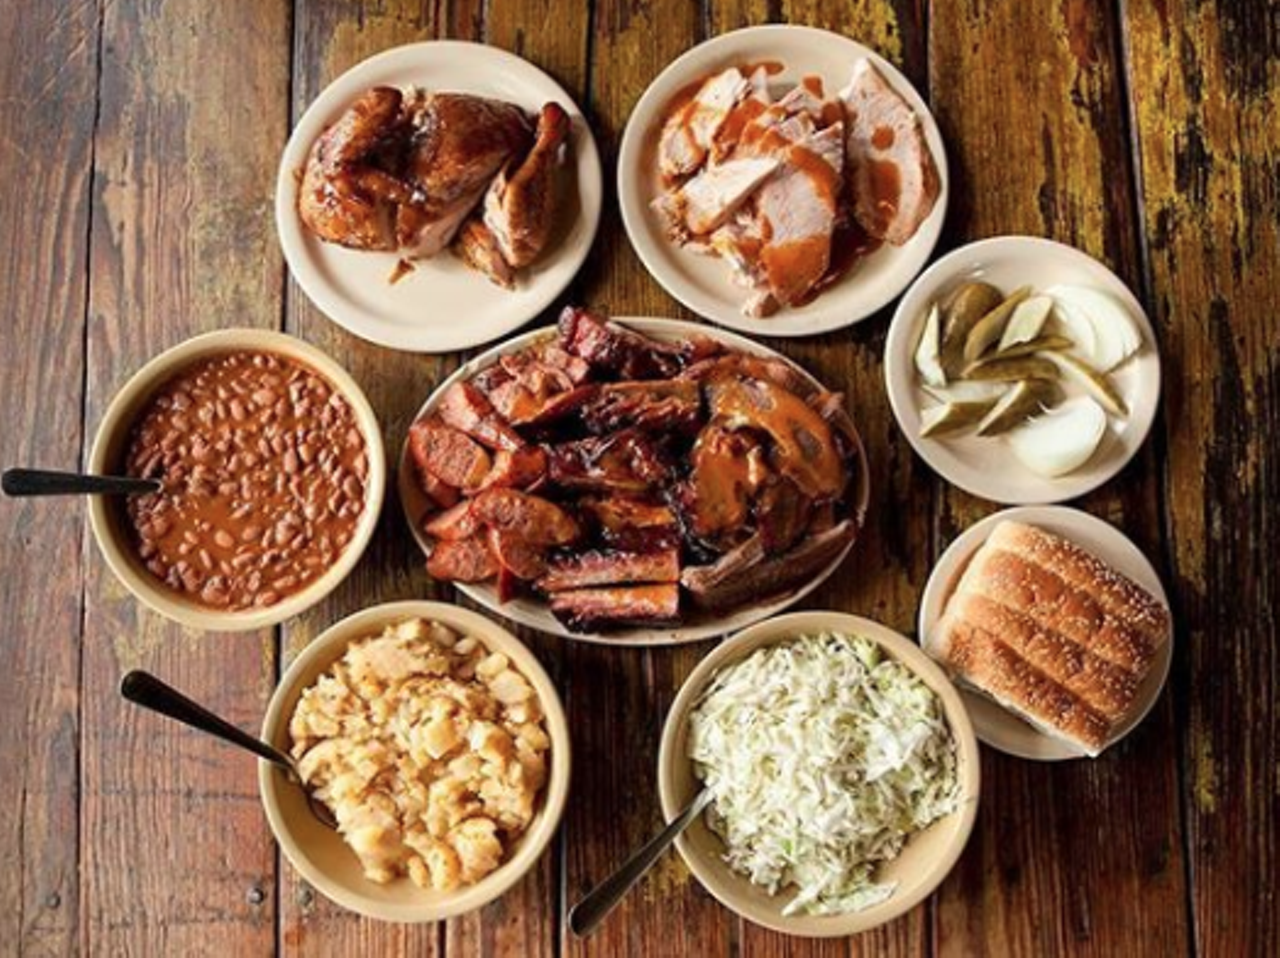 The Salt Lick
18300 FM 1826, Driftwood, (512) 858-4959, saltlickbbq.com
Looking for live music to enjoy with your barbecue? The Salt Lick allows you to BYOB for the show and meal, just remember to bring cash. 
Photo via Instagram / saltlickbbq